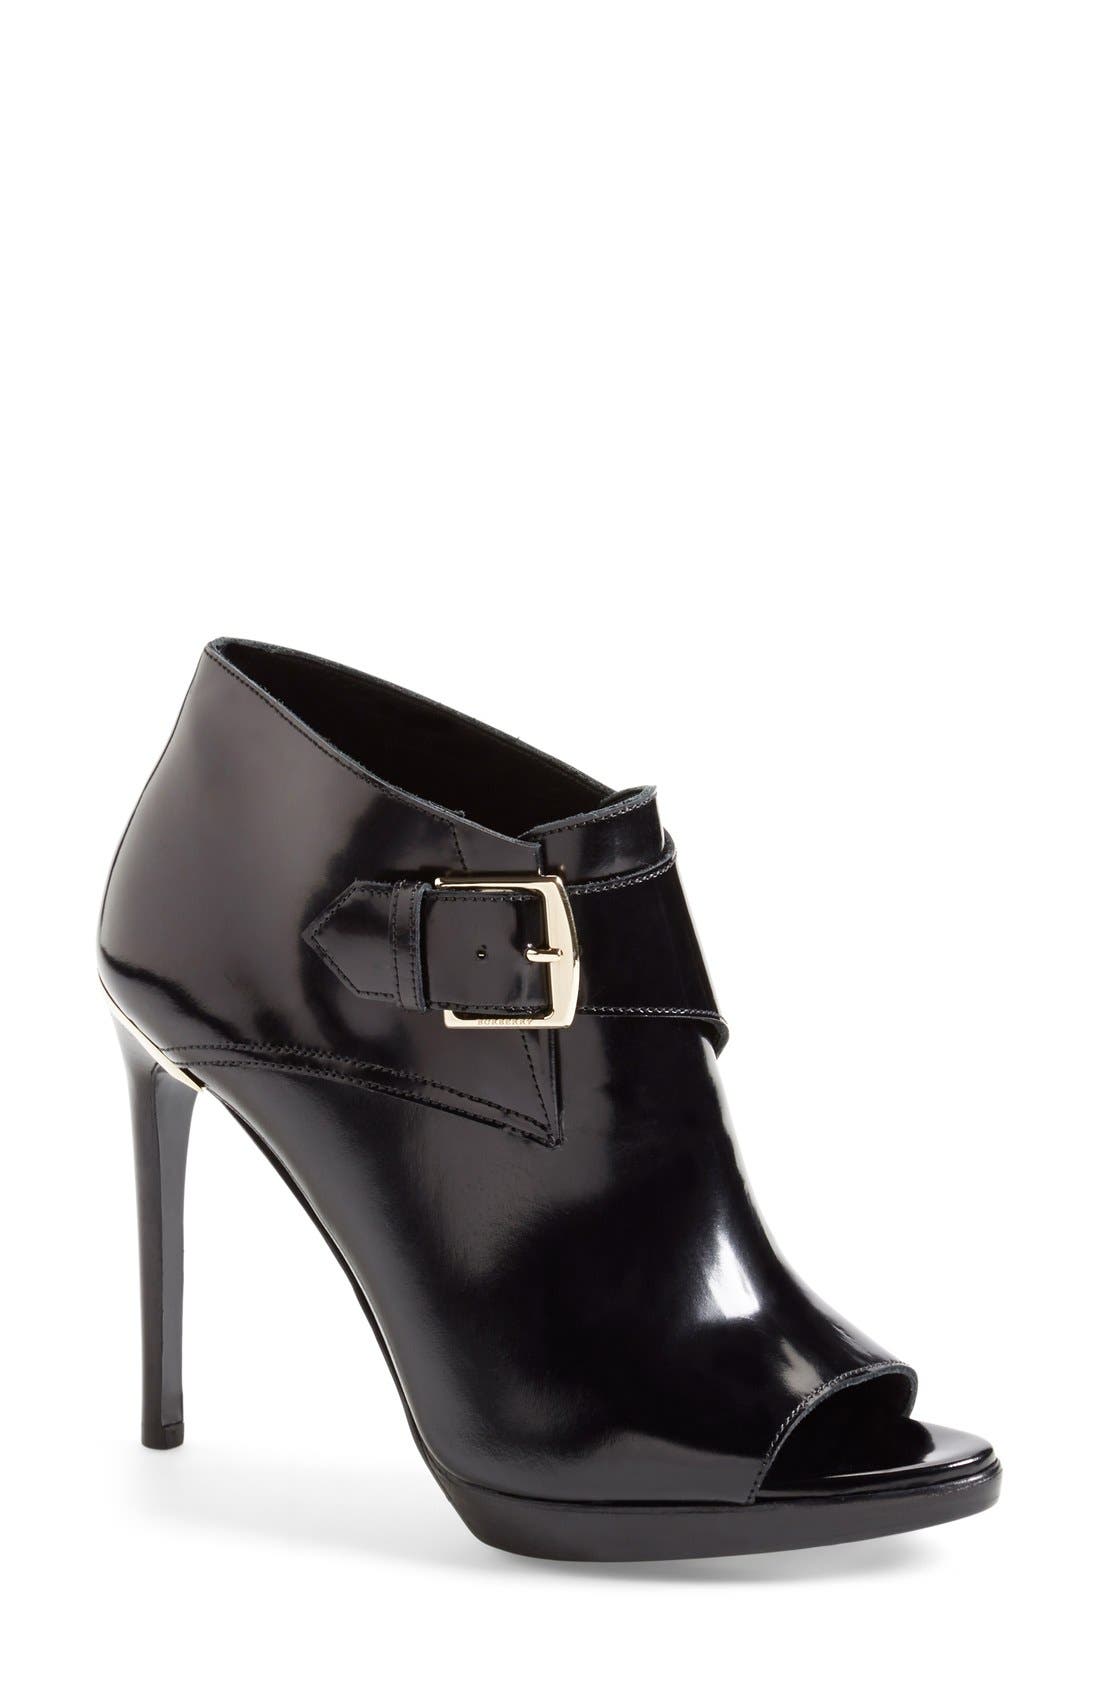 Burberry 'Holtsmere' Peep Toe Bootie 